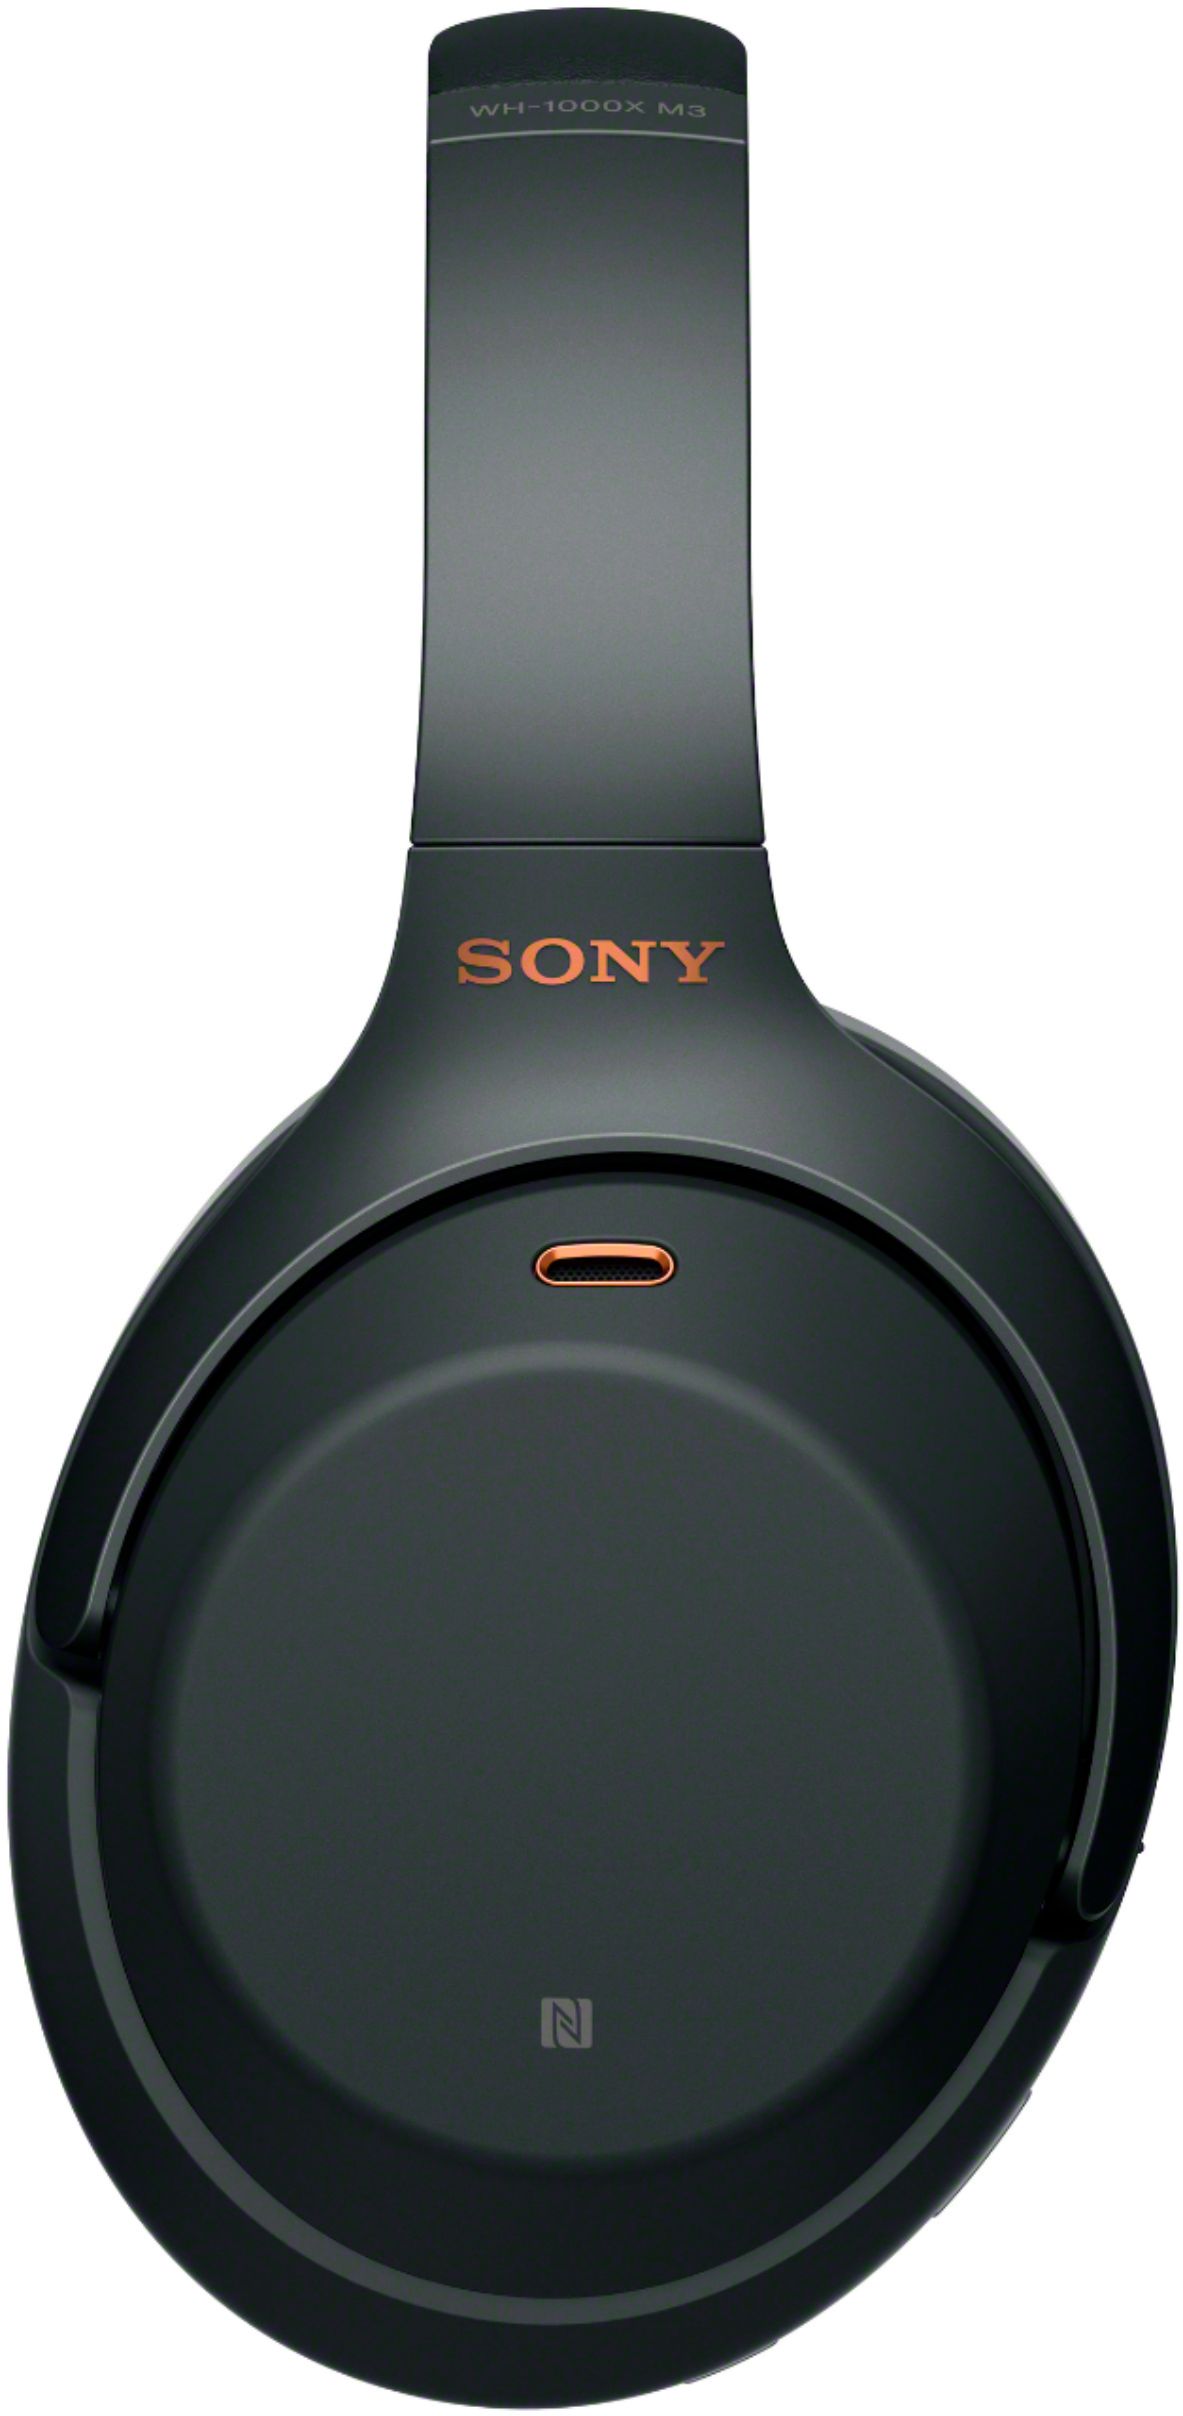 Sony WH-1000XM3 Wireless Noise Cancelling Over-the-Ear Headphones 